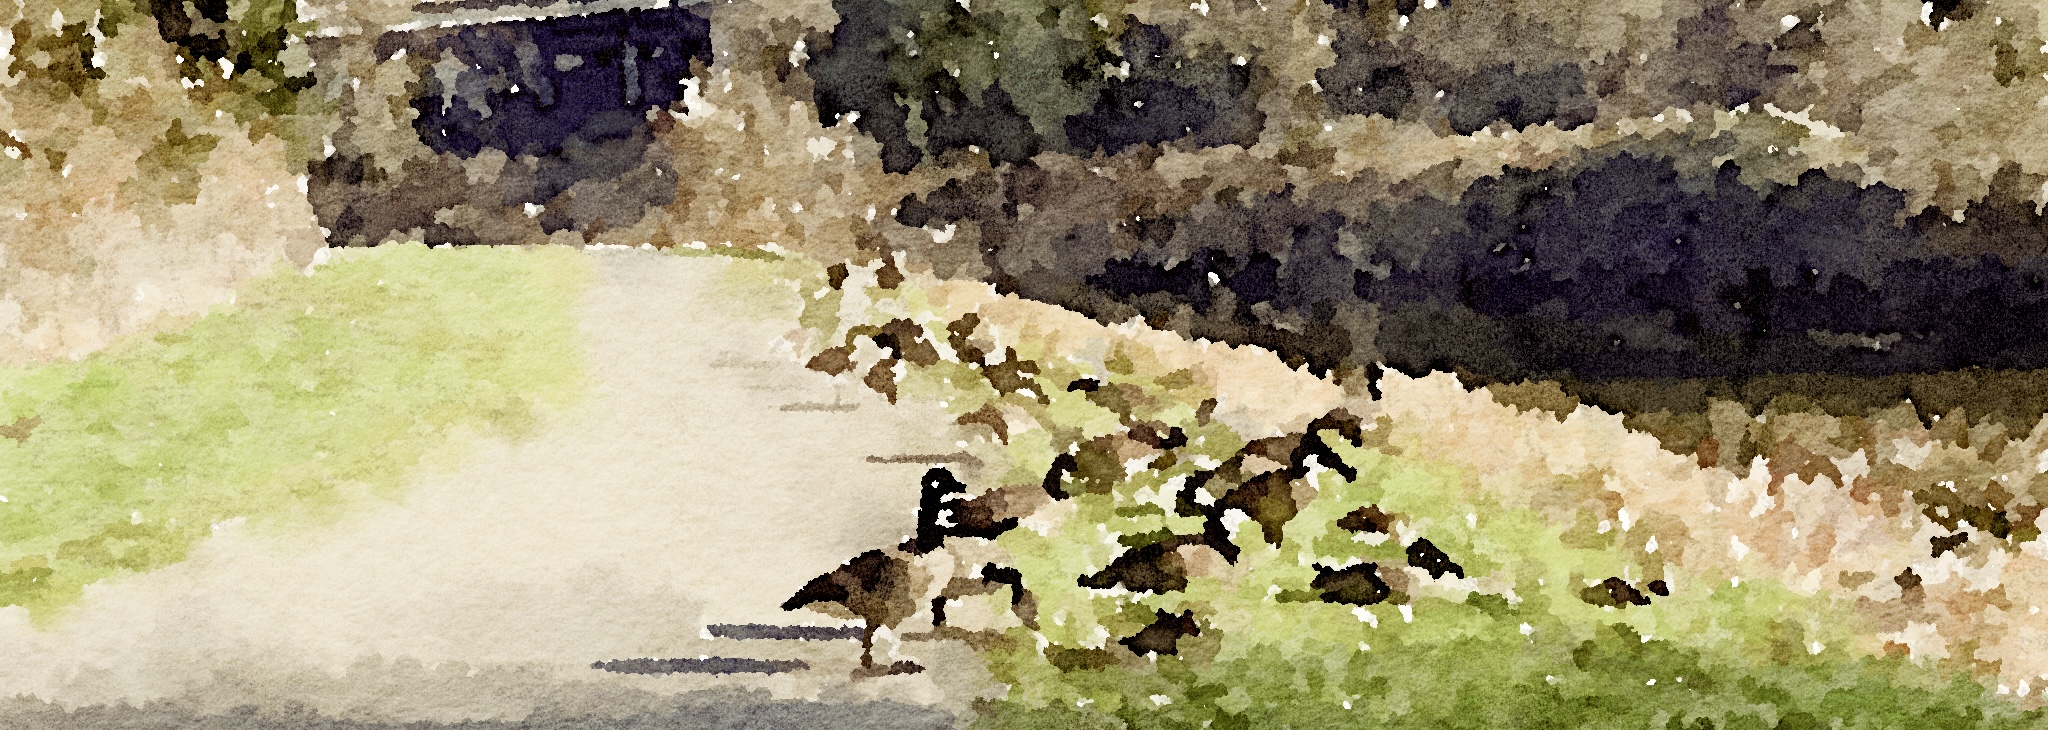 Geese on the Burke-Gilman Trail